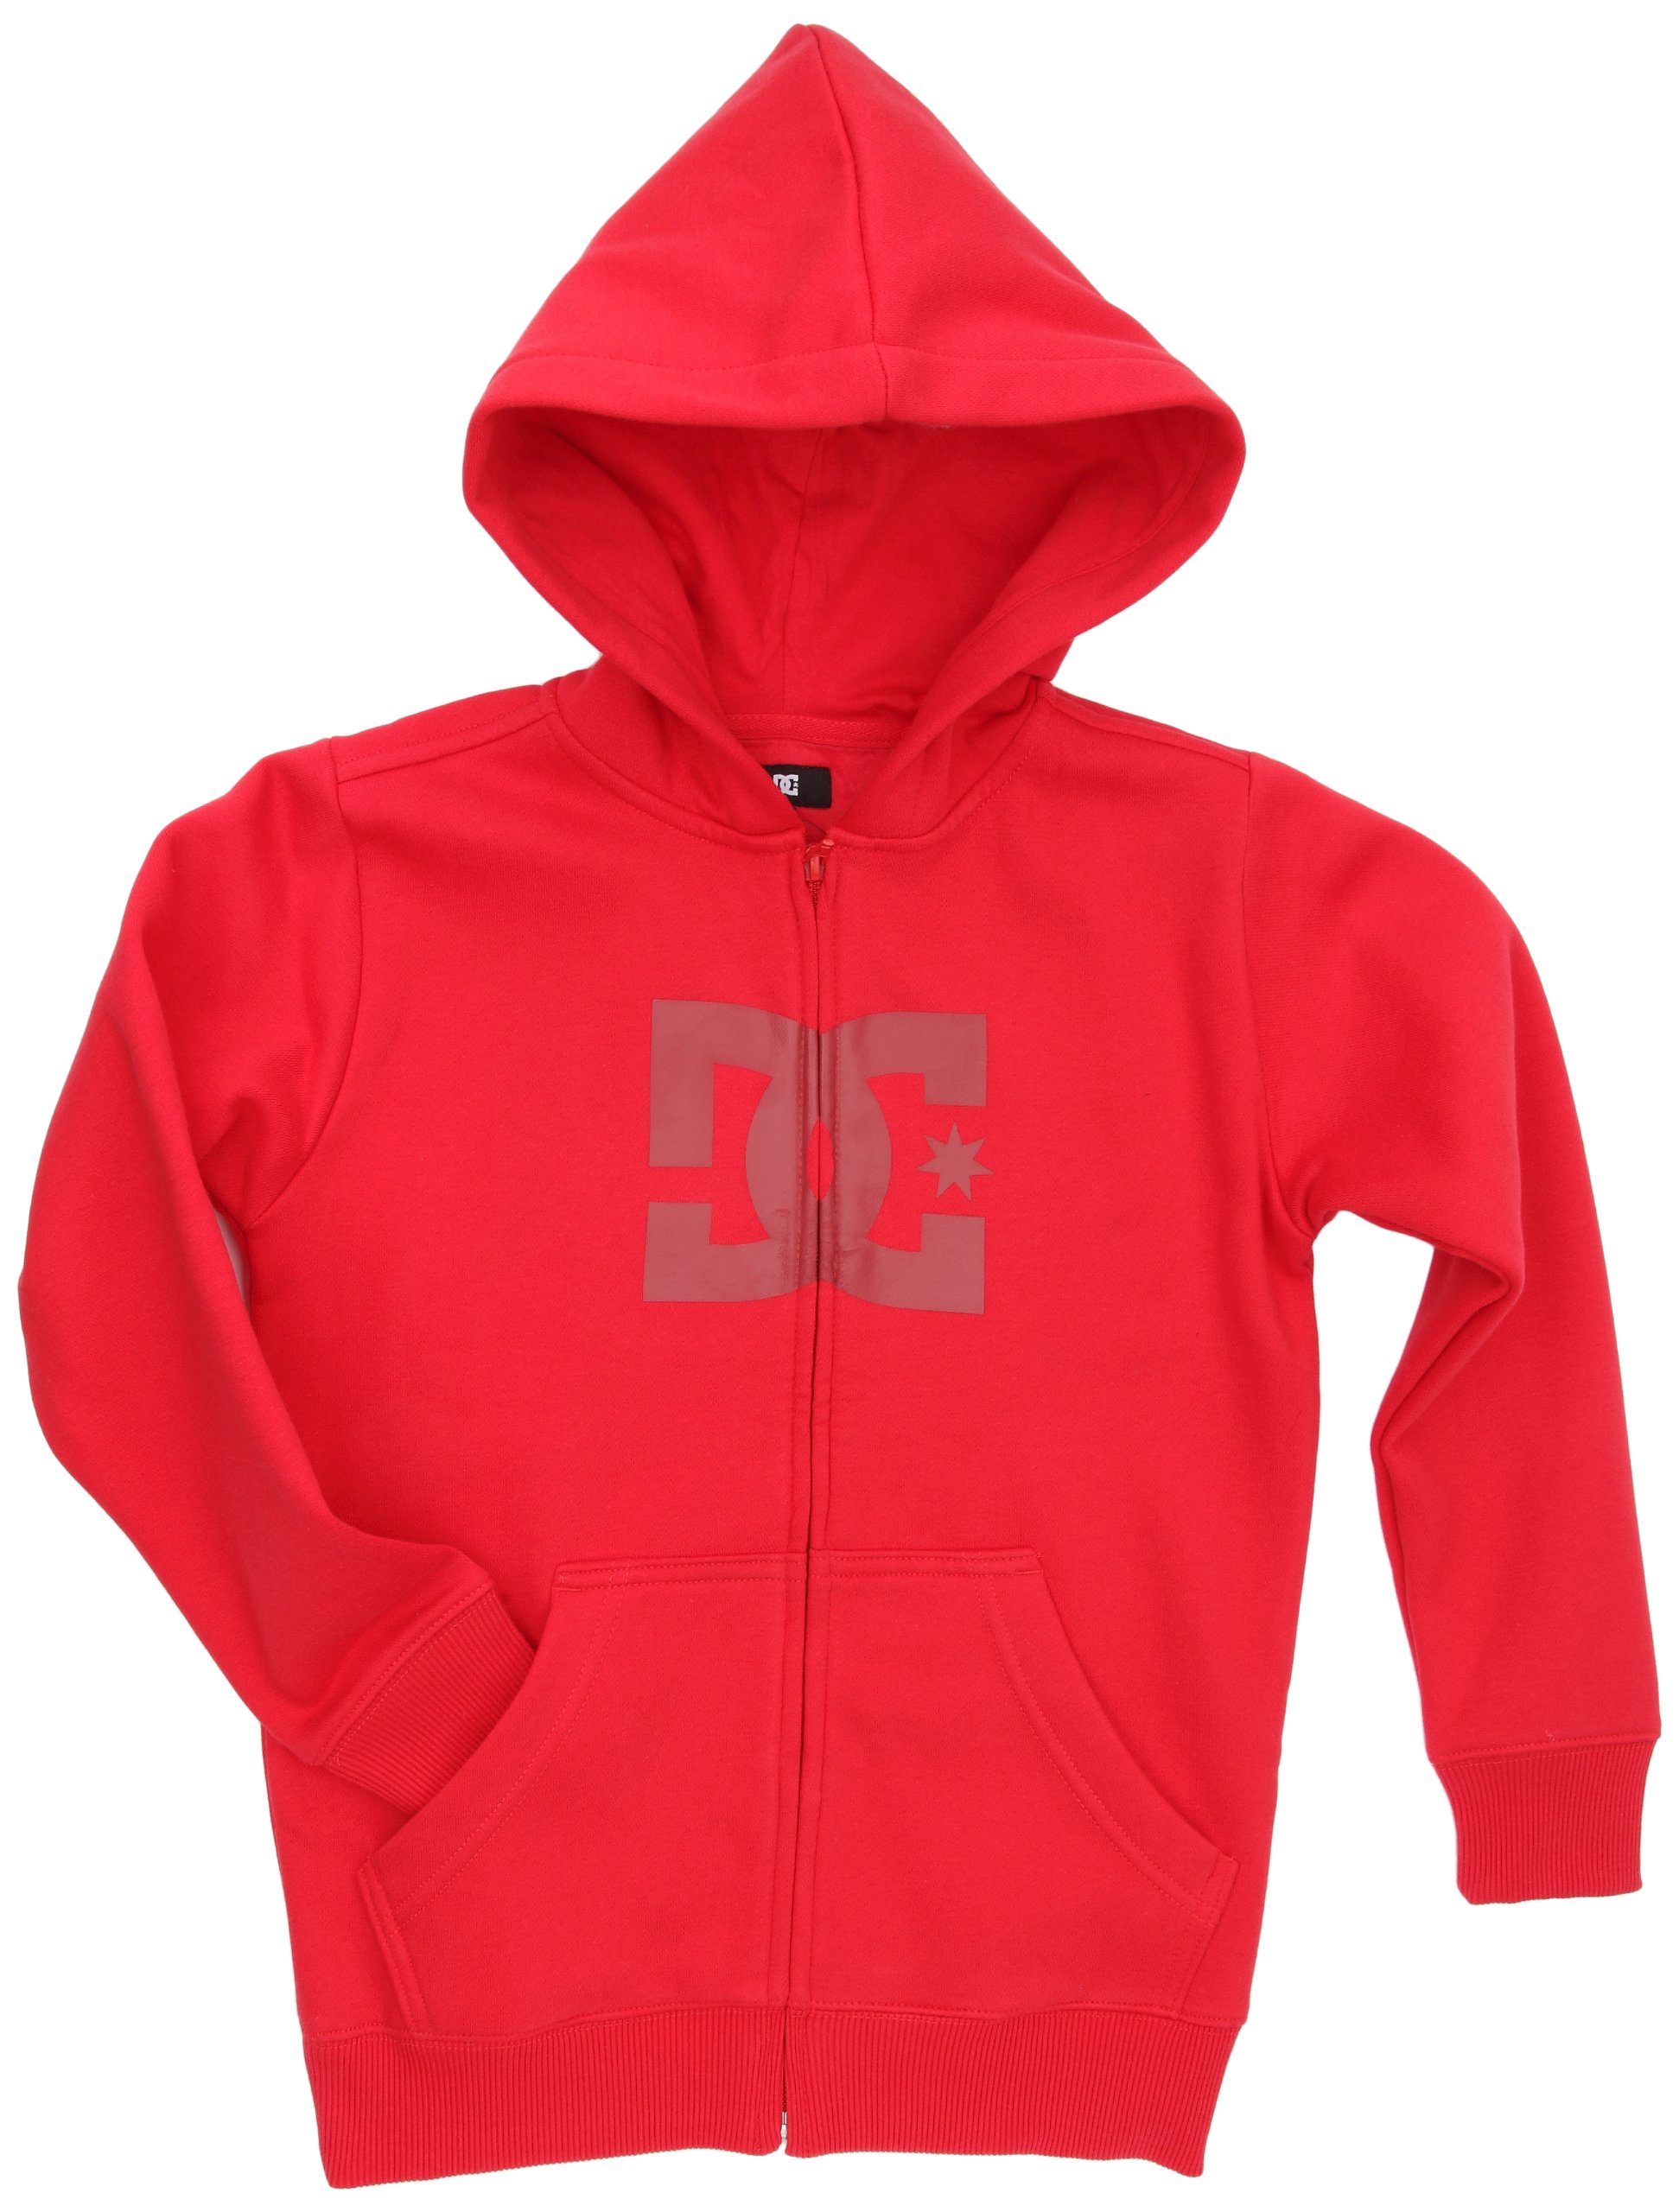 DC Shoes Jungen Screenline Sweatjacke Star ZH, athletic red, S, DRBSW032-ATHD